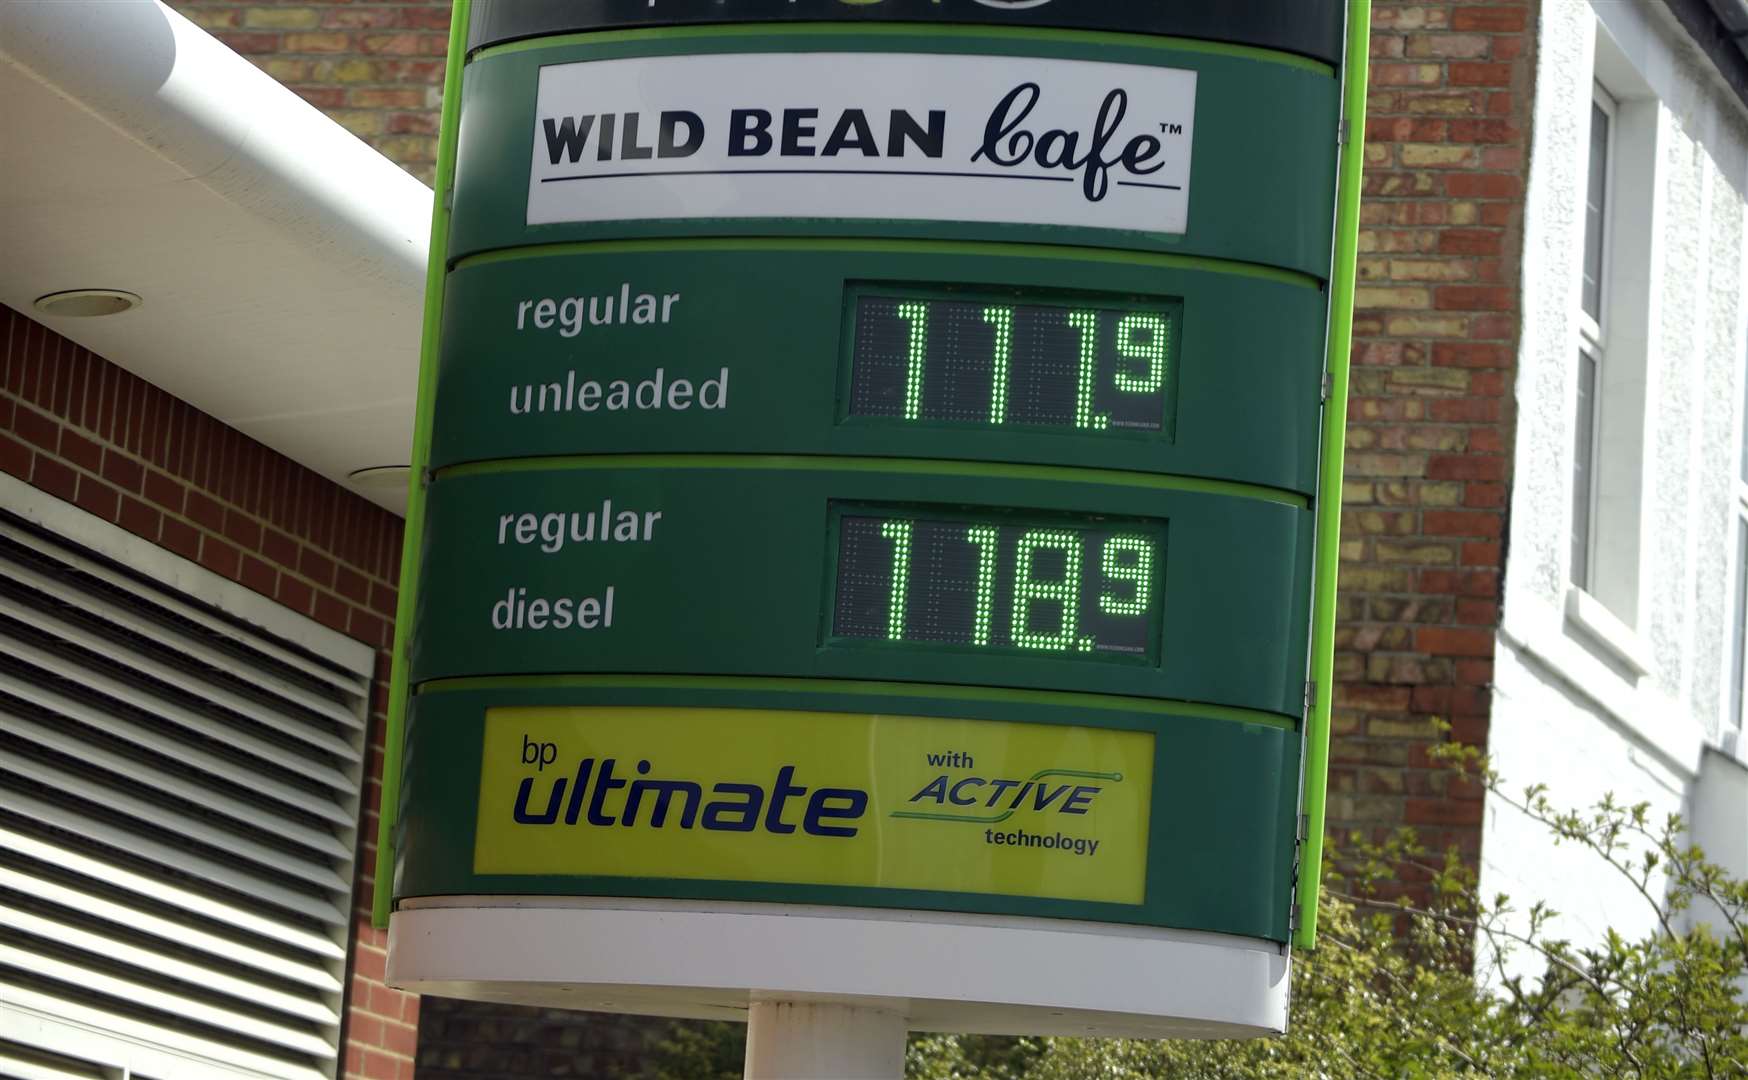 Fuel prices at the BP garage in Cheriton on Wednesday. Pic: Barry Goodwin